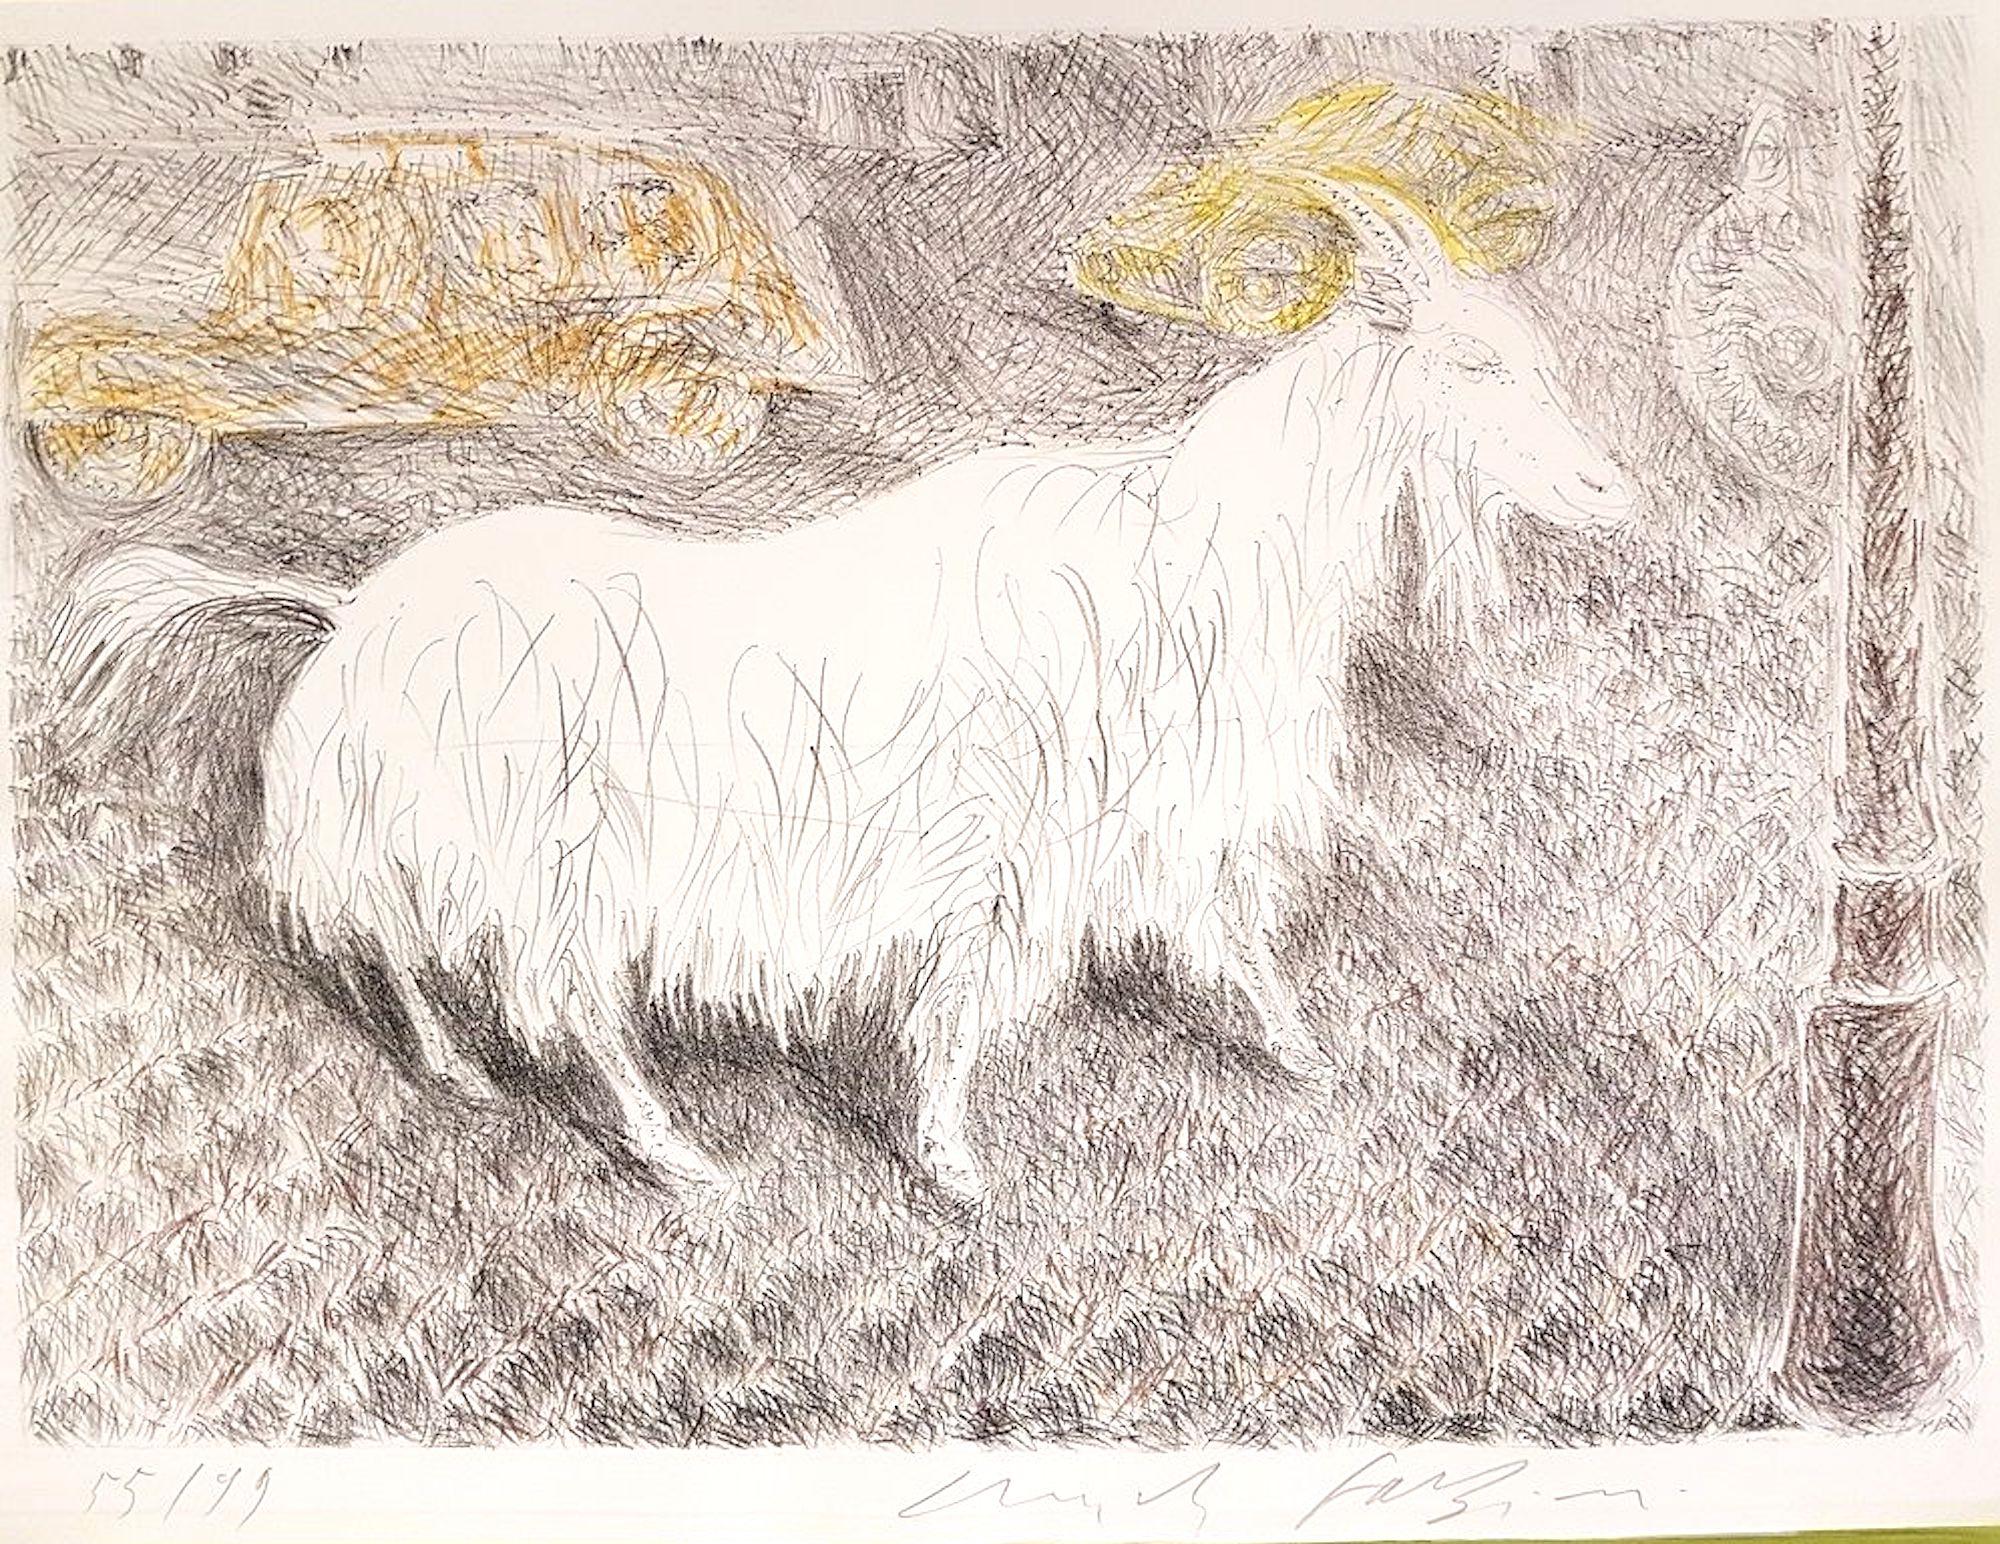 The Goat - Original Lithograph by Pericle Fazzini - 1971